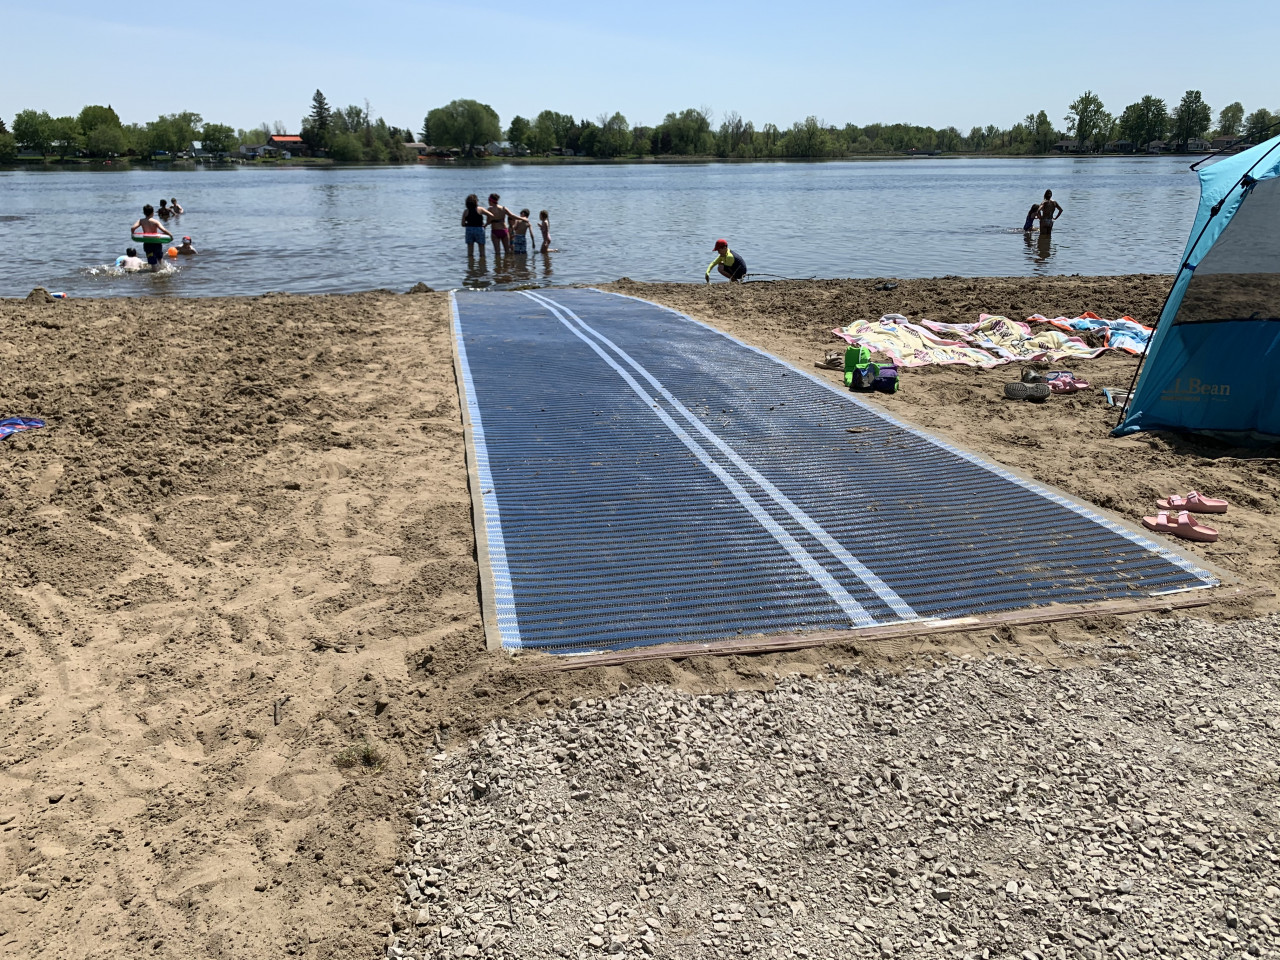 An accessible mat runs across a sandy beach down to the Rideau River while beach-goes play in the water.